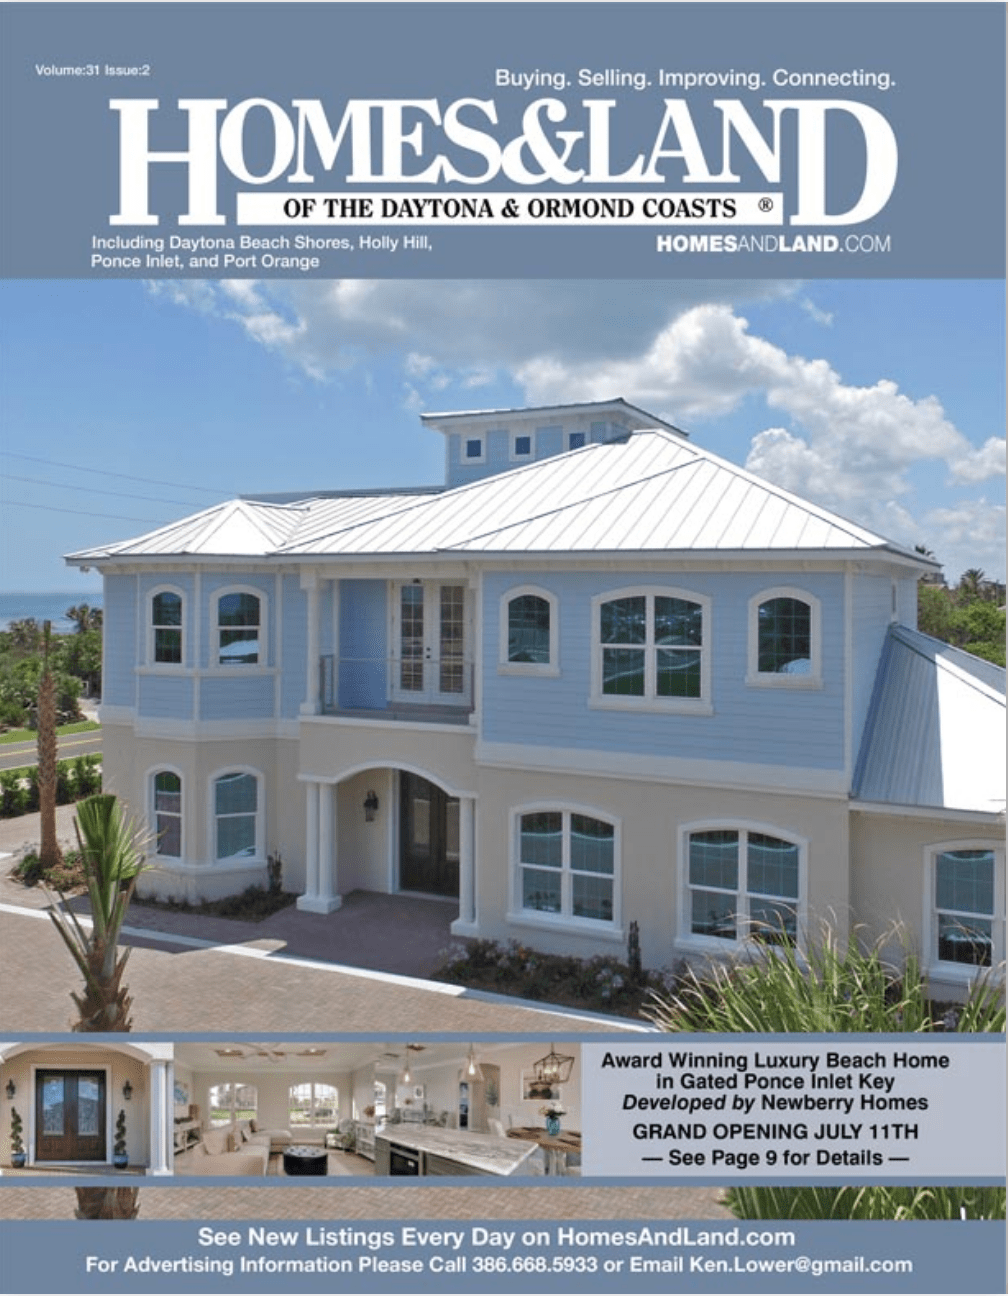 Homes and Land magazine cover featuring Ponce Inlet Key